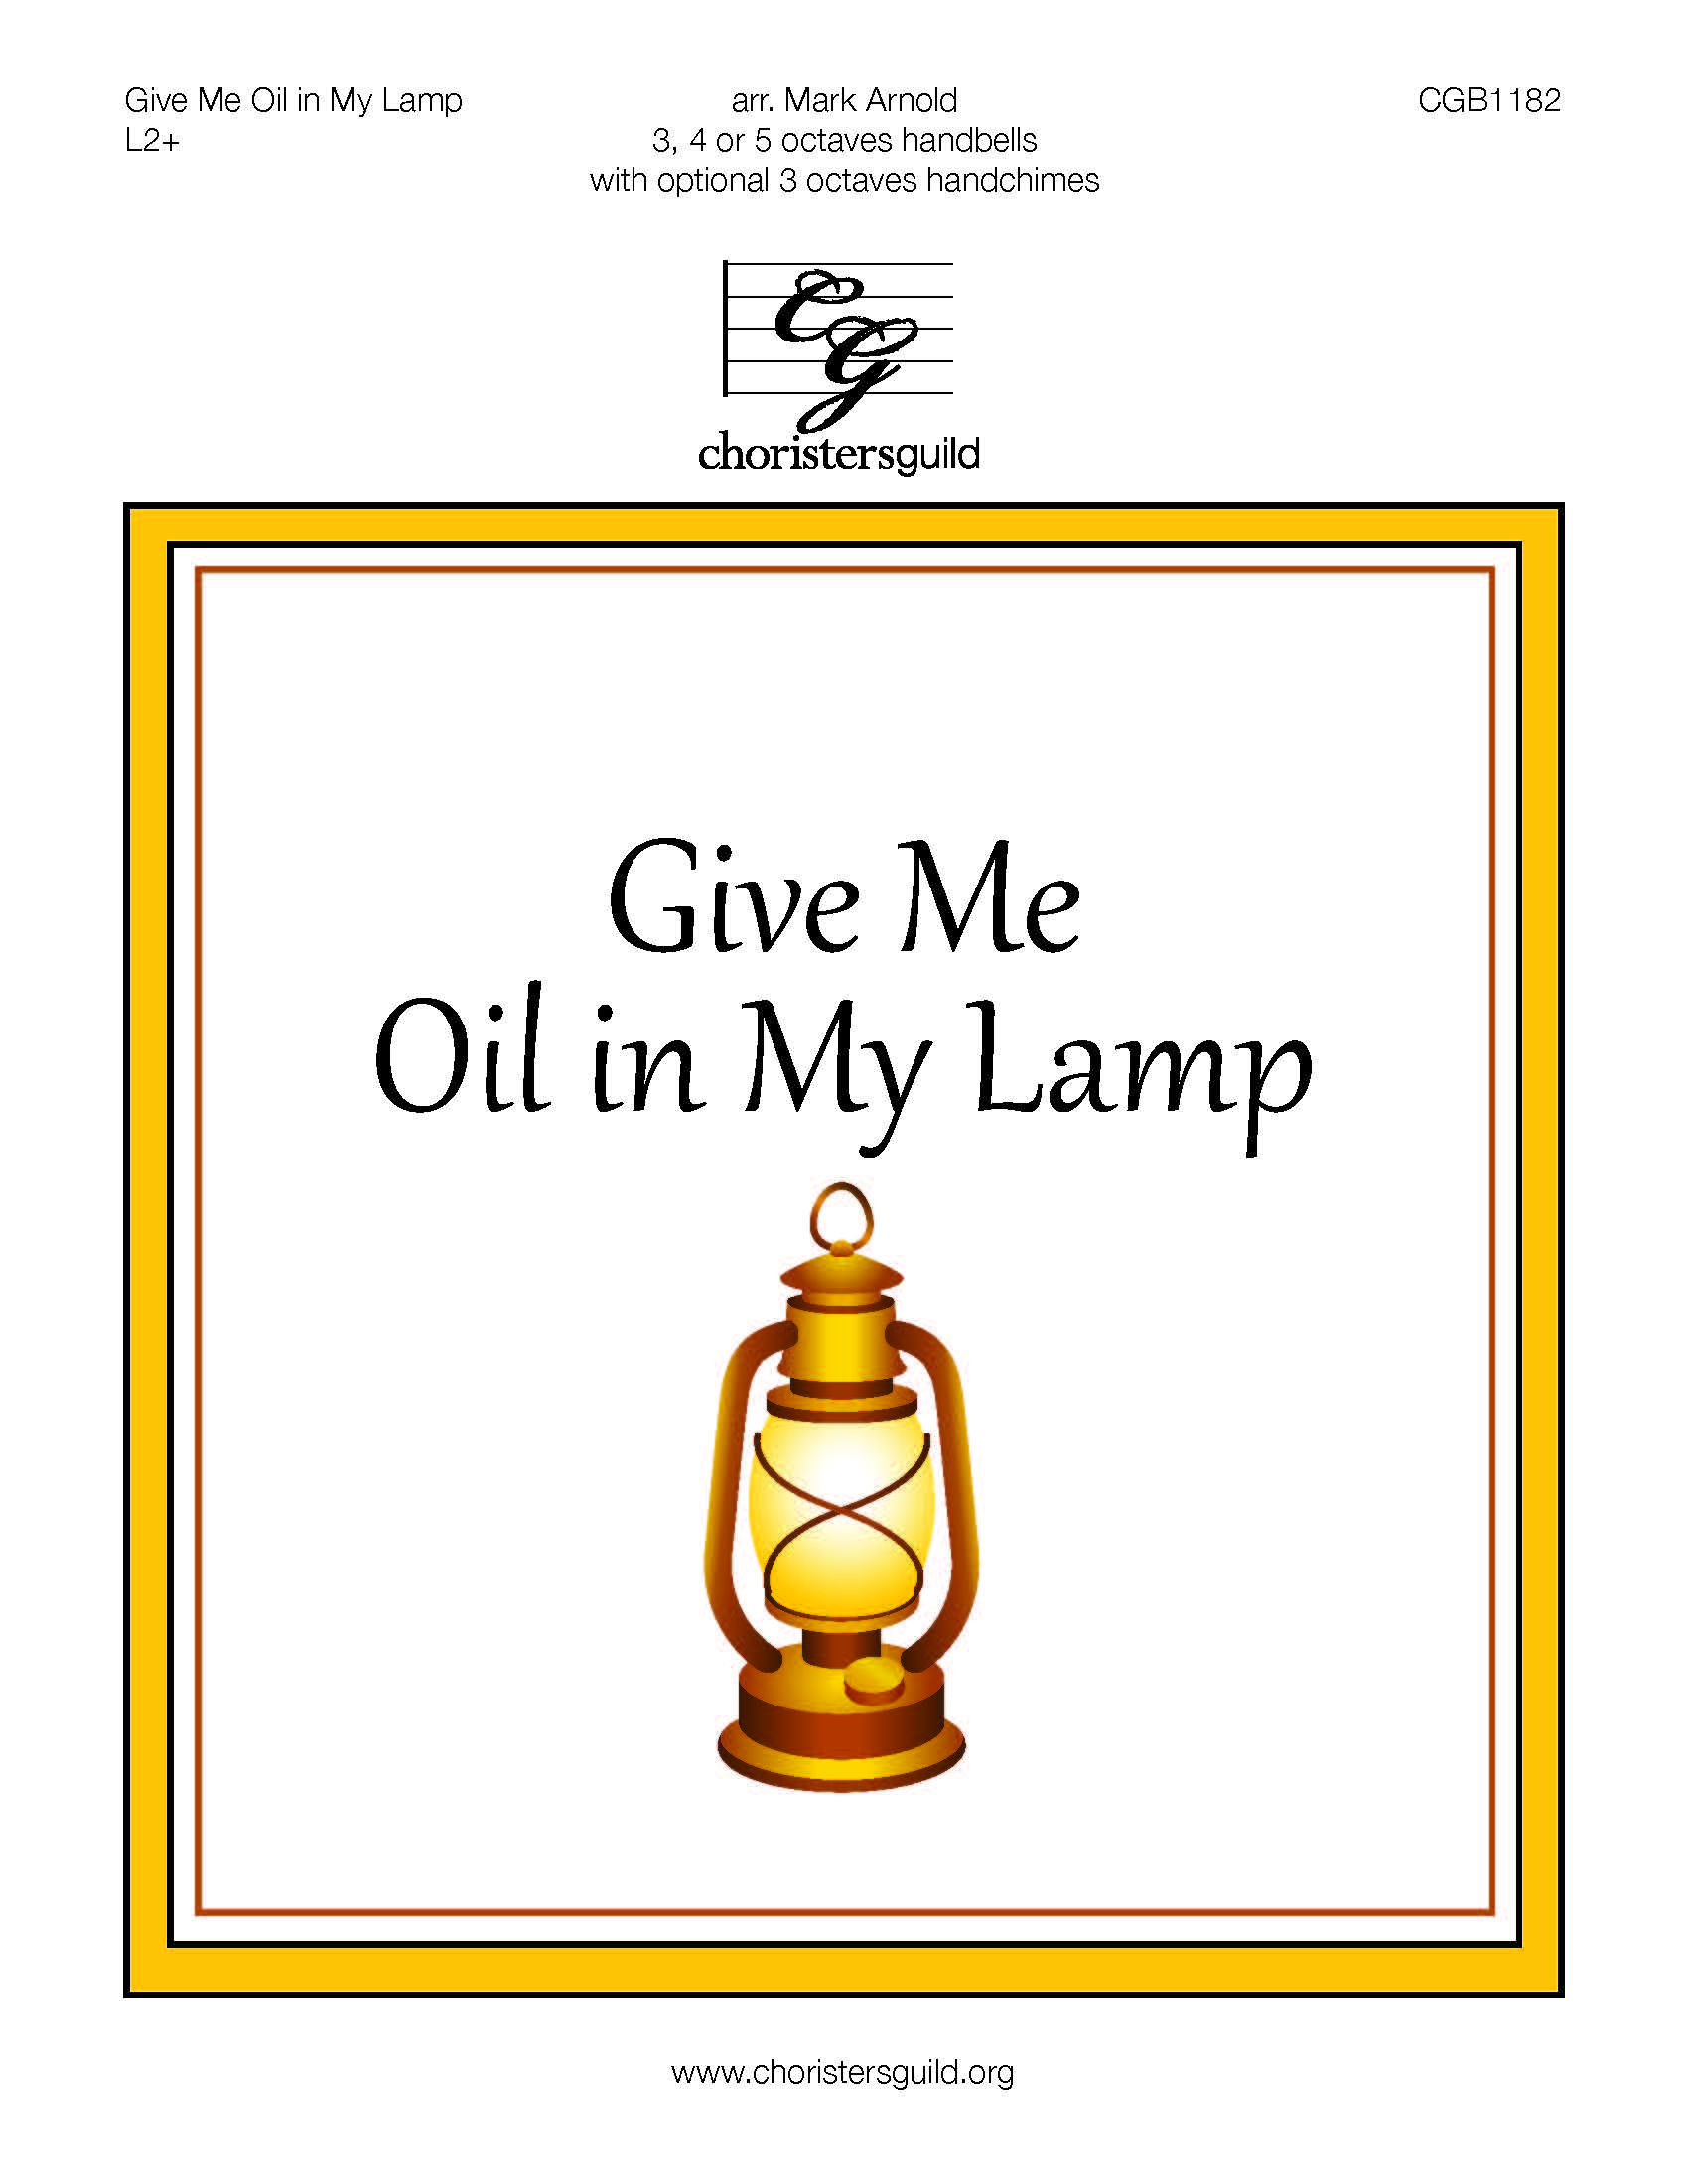 Give Me Oil in My Lamp - 3-5 octaves